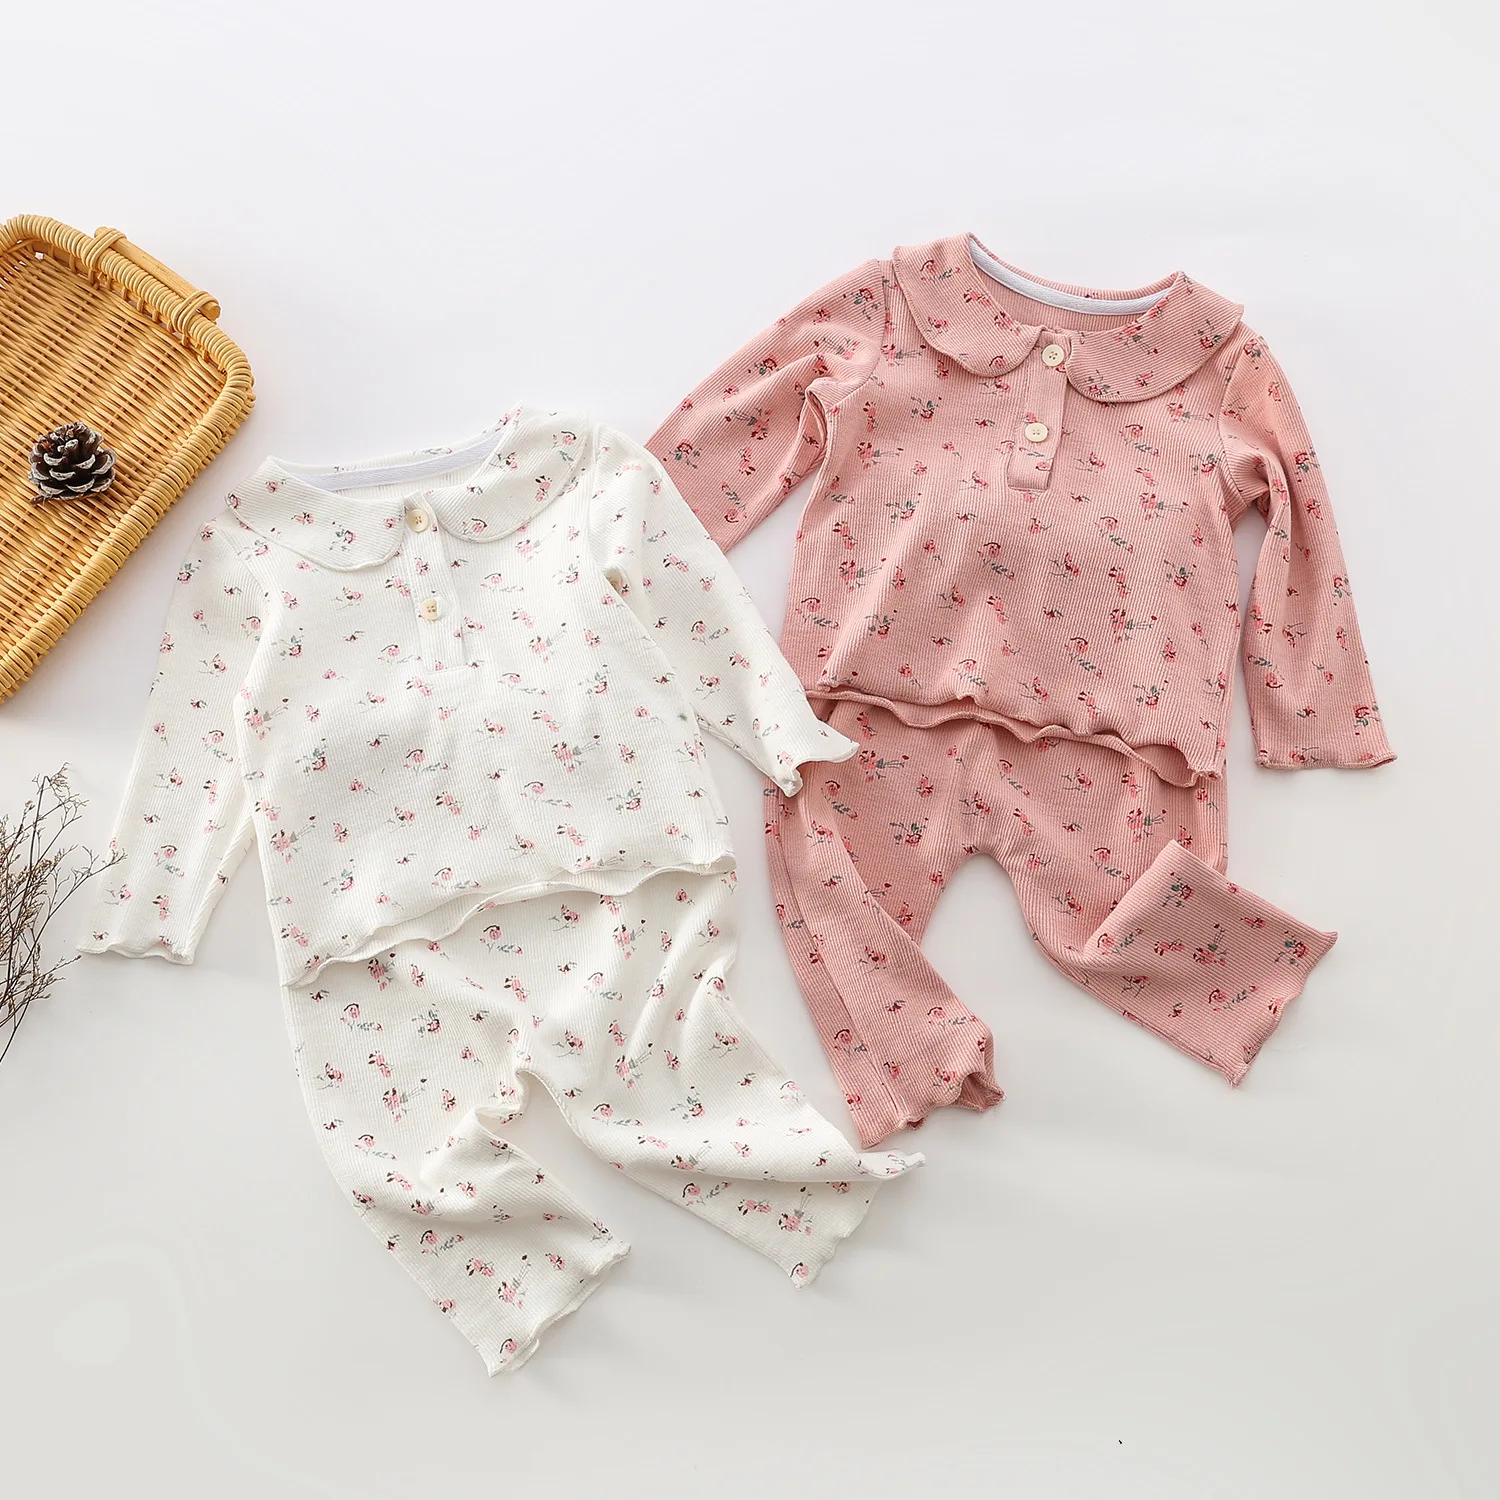 

Spring Autumn baby girl ribbed home wear floral clothes set , infants long sleeve doll collar shirt with pants 2pcs pajamas set